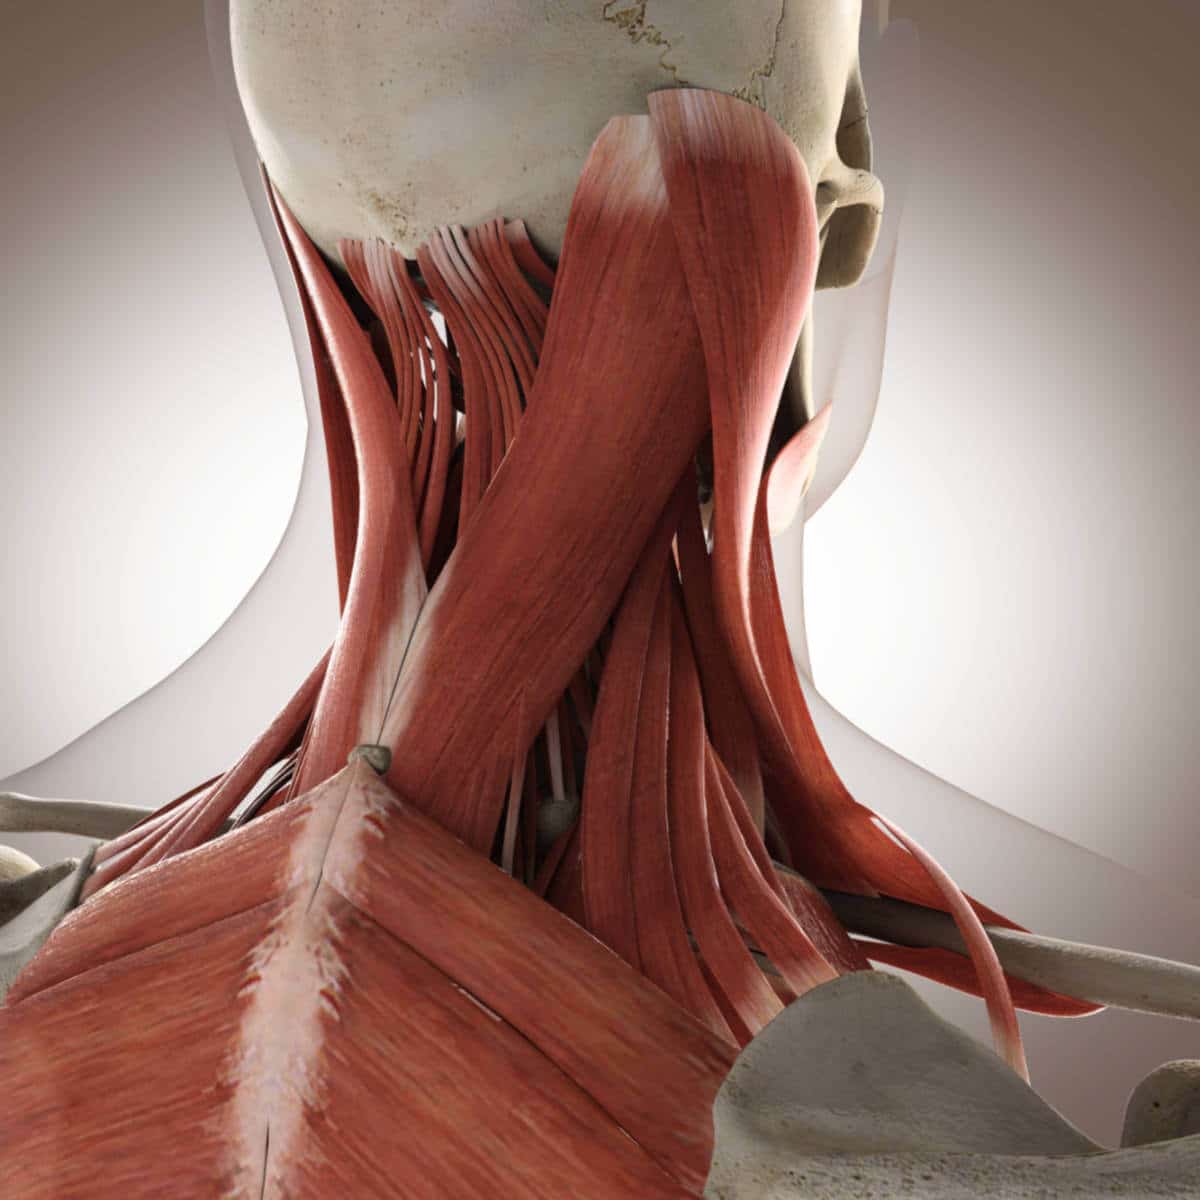 Neck muscle spasm, Neck muscle injury, Neck muscle pain, Neck muscle injury, Stiff neck muscles